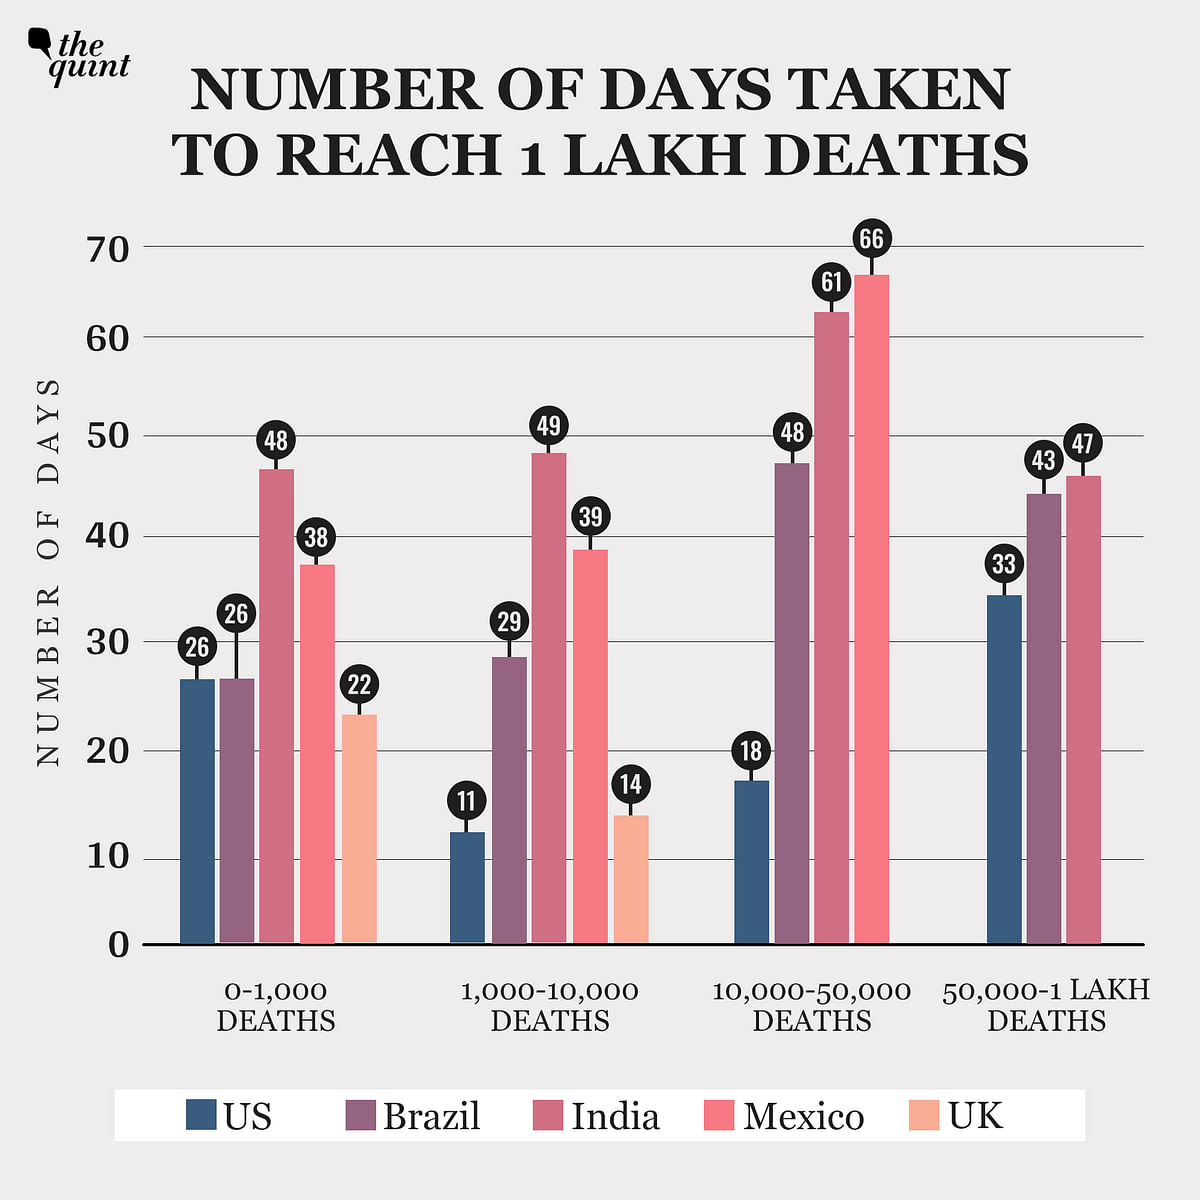 We deep dive into the data to understand how India lost so many lives